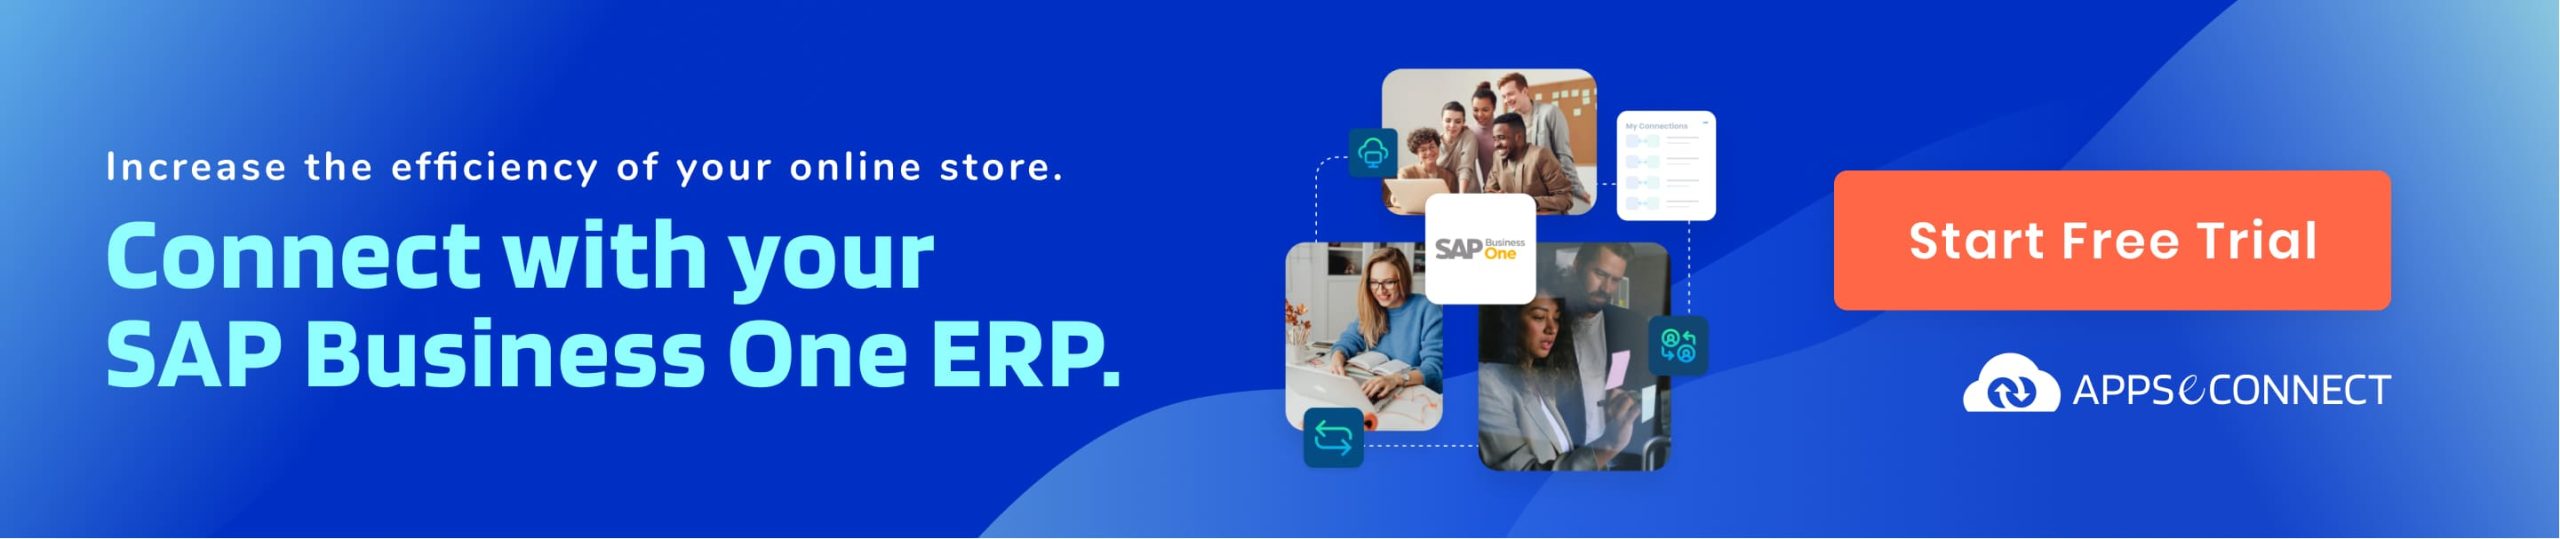 Integrate SAPB1 with eCommerce, Marketplace and CRM